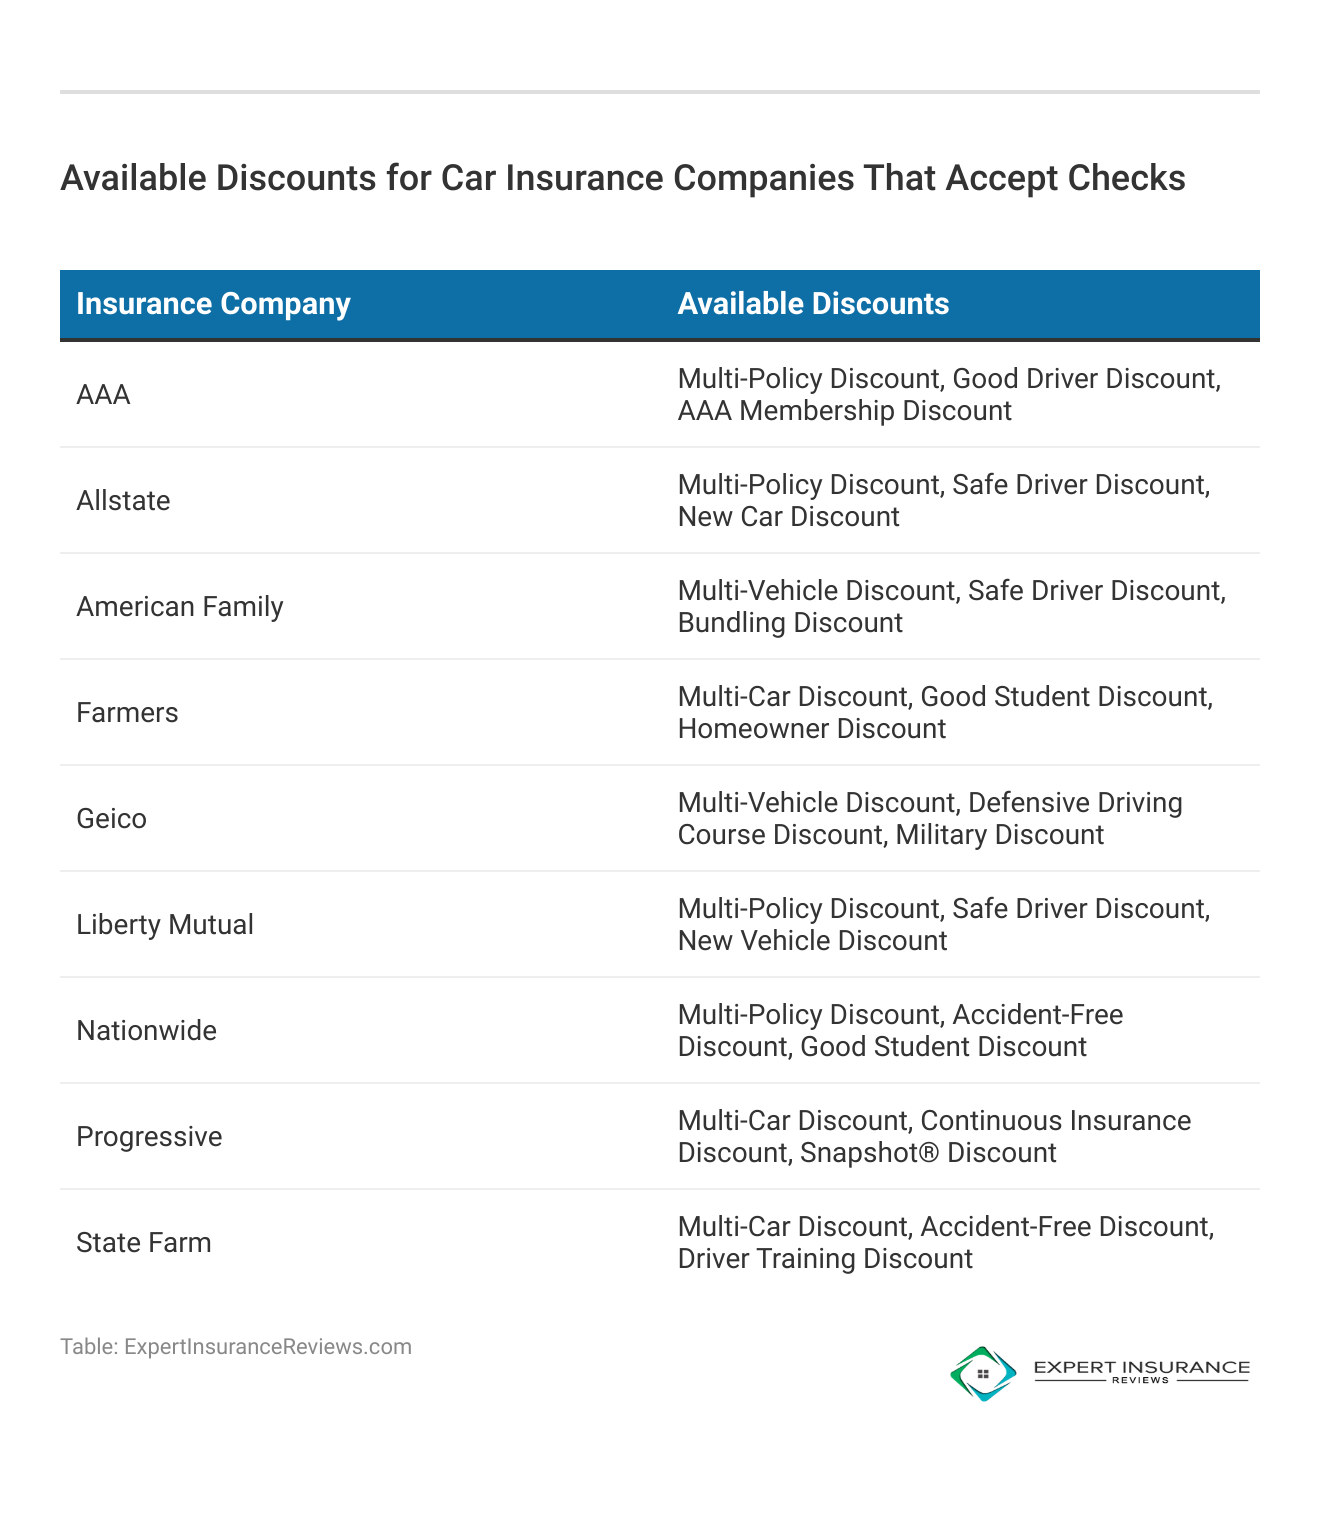 <h3>Available Discounts for Car Insurance Companies That Accept Checks</h3>